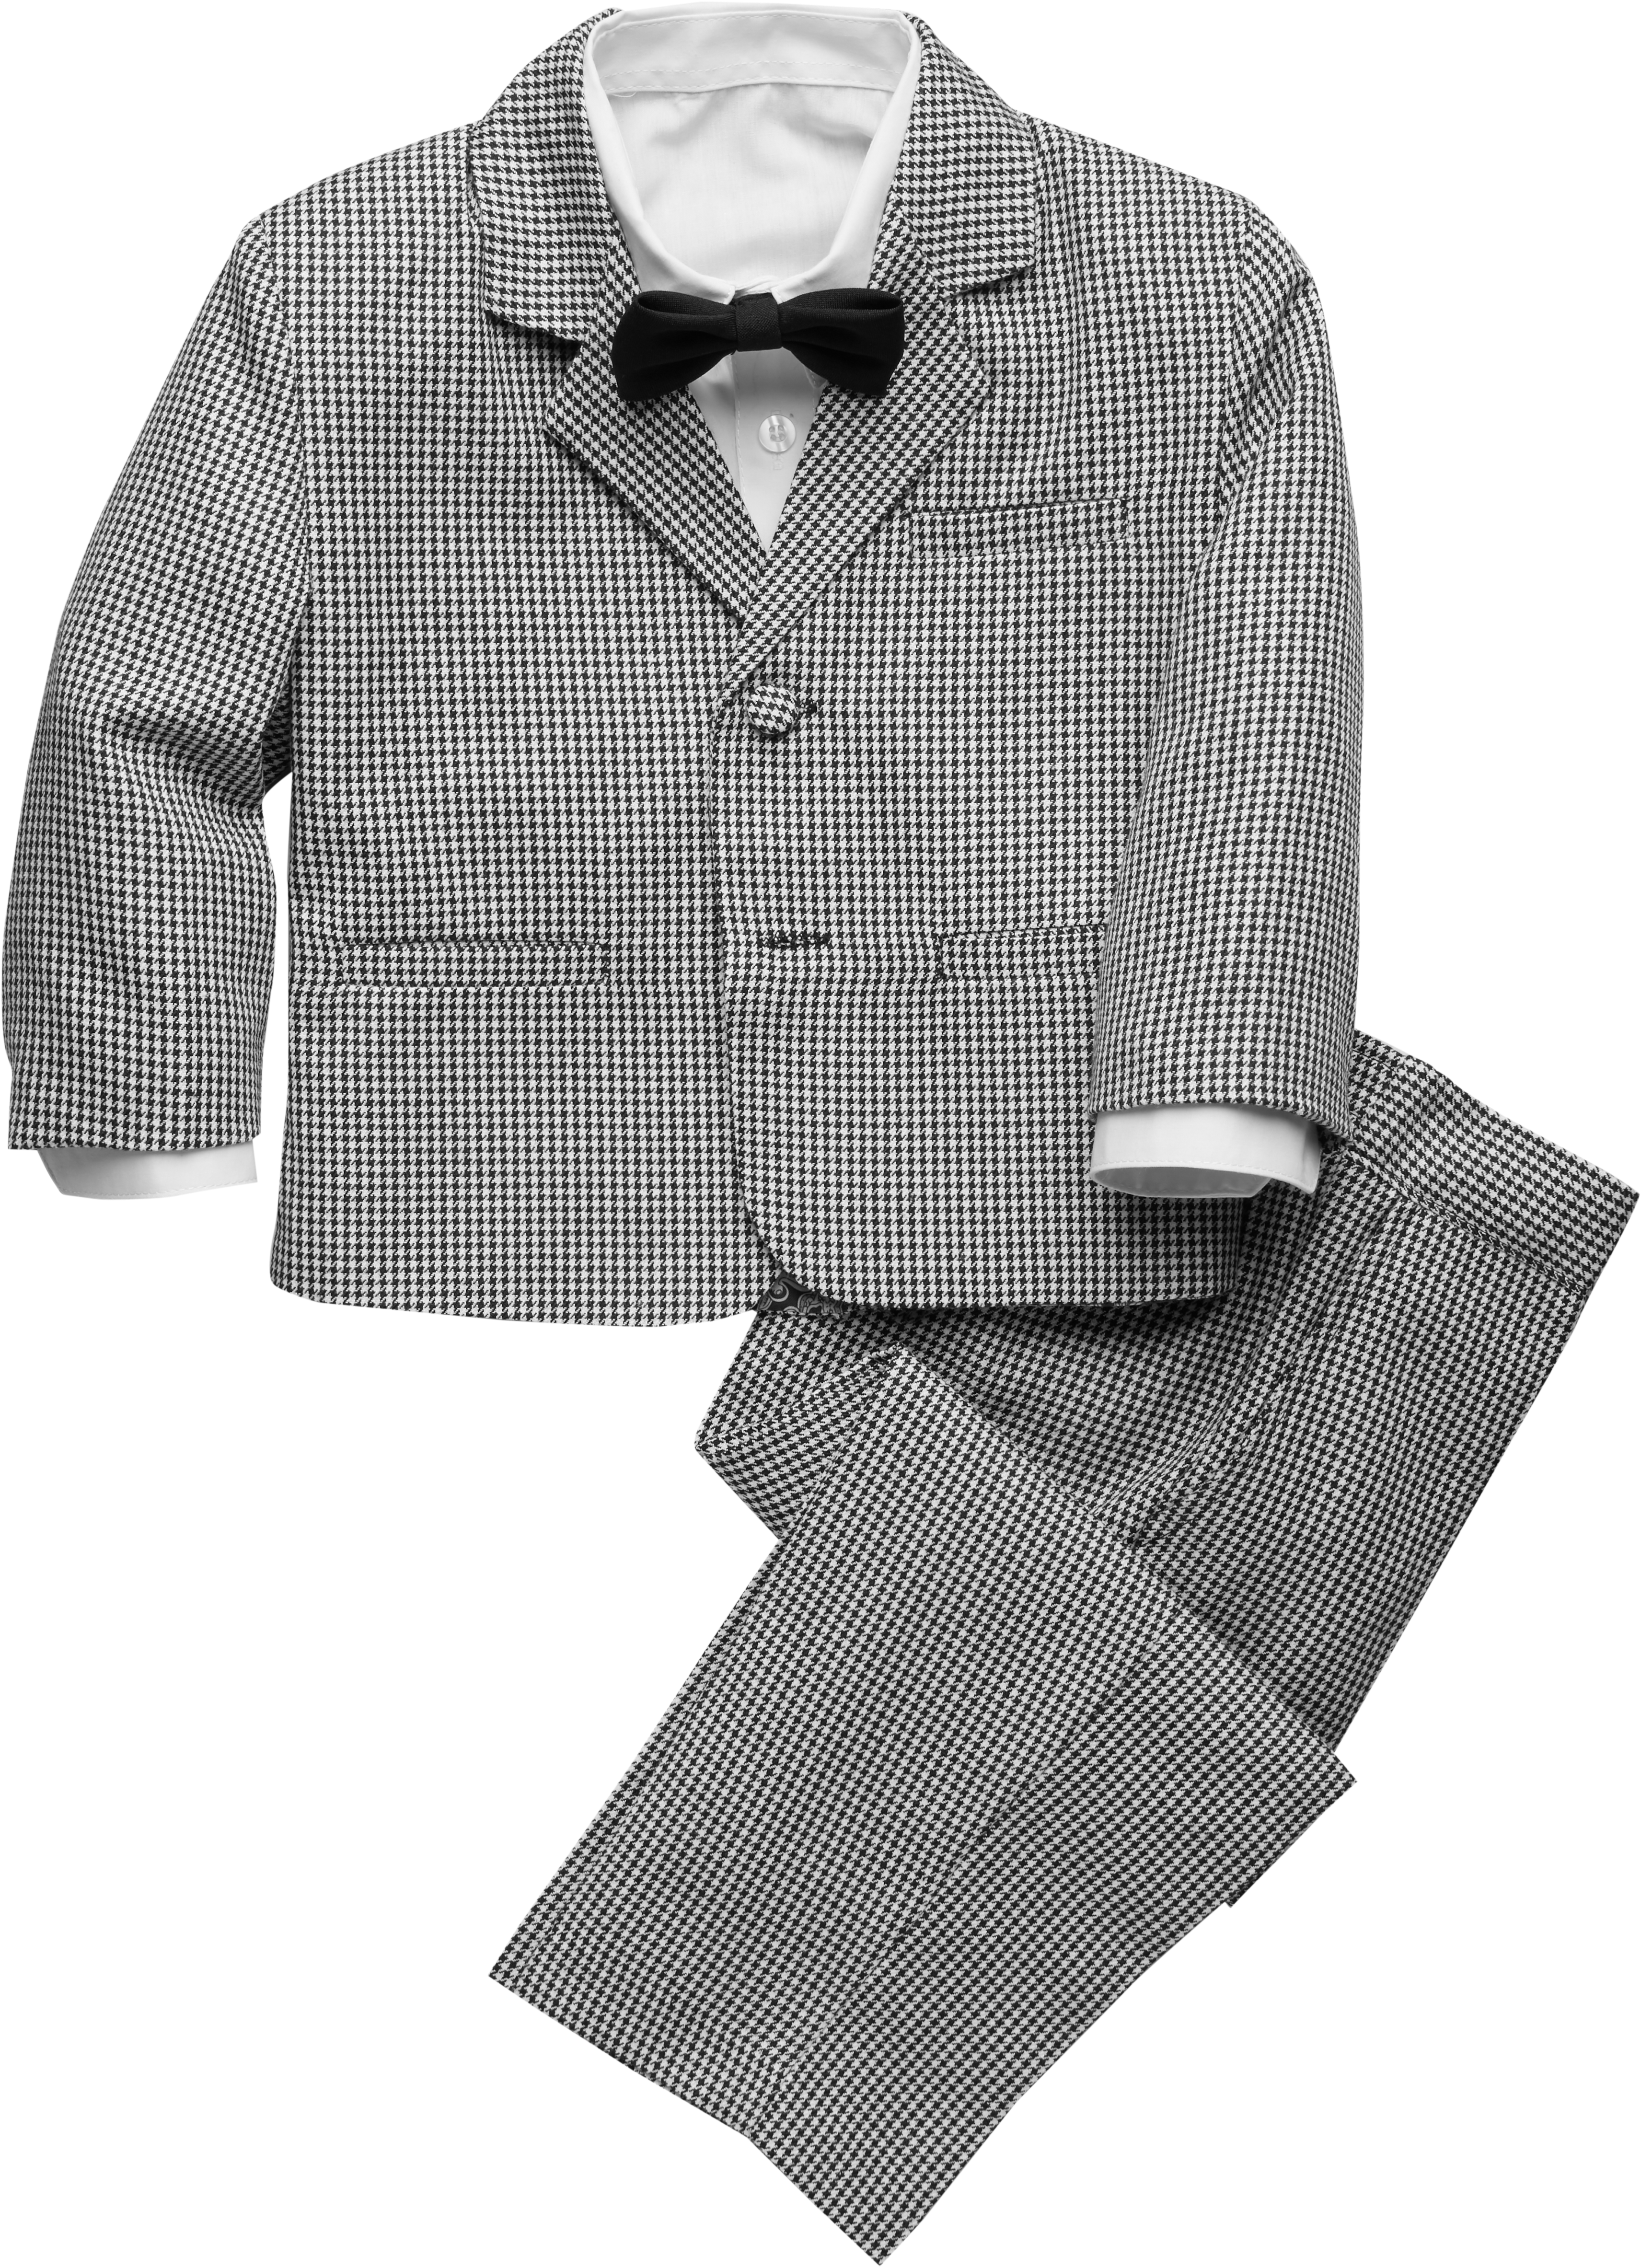 Peanut Butter Collection Toddler Boys Tuxedo Black White Houndstooth Men S Suits Men S Wearhouse